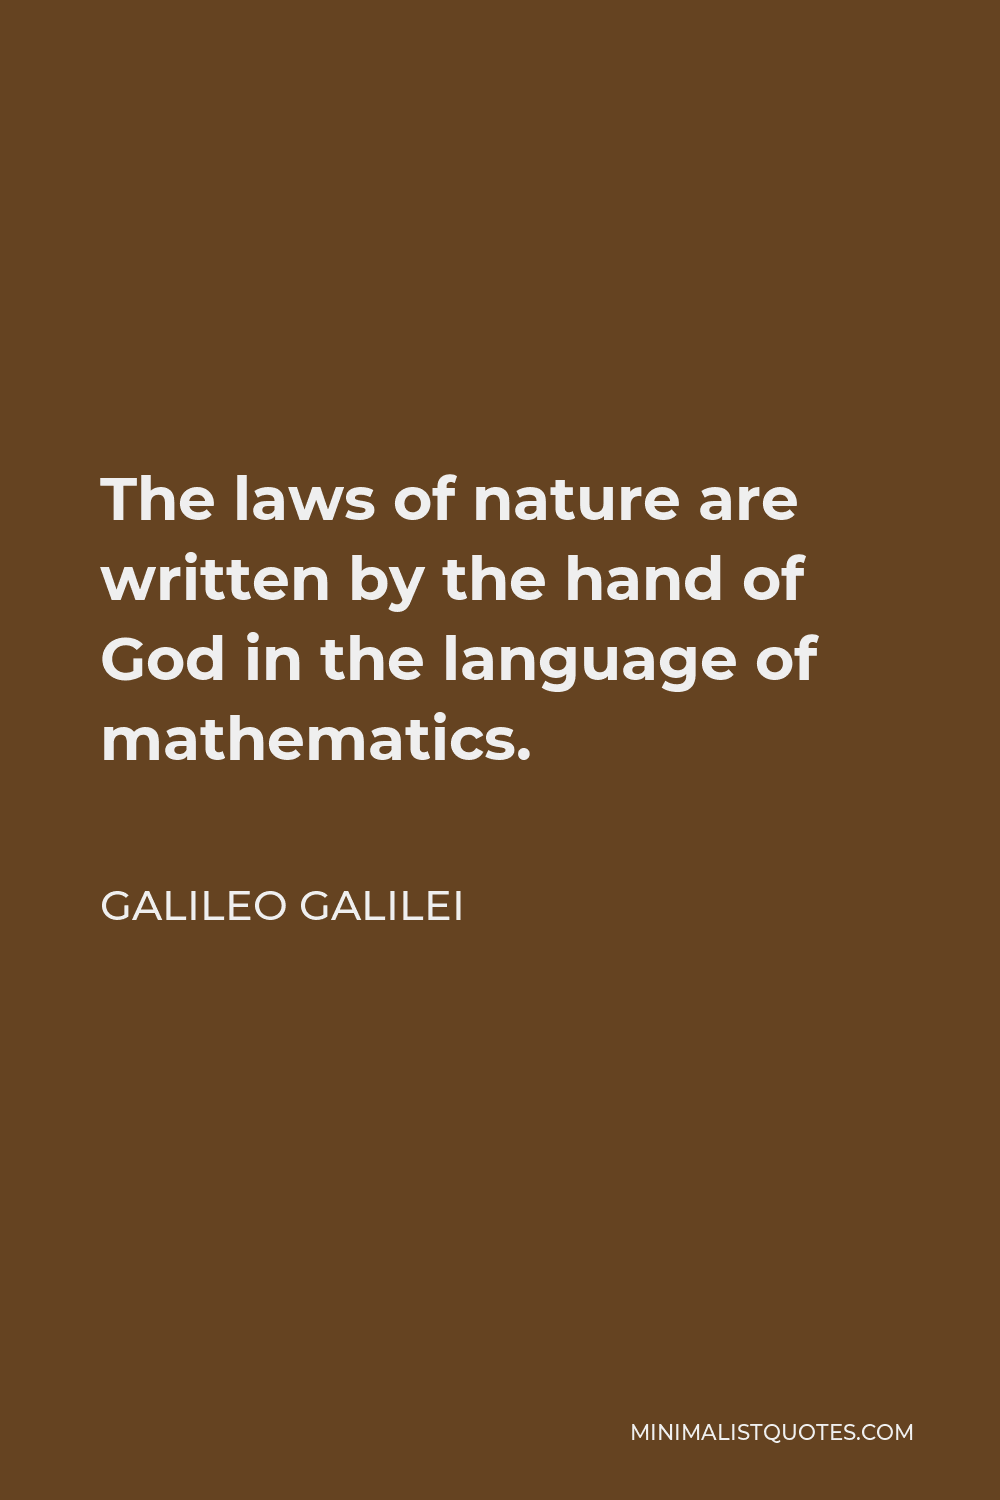 Galileo Galilei Quote - The laws of nature are written by the hand of God in the language of mathematics.